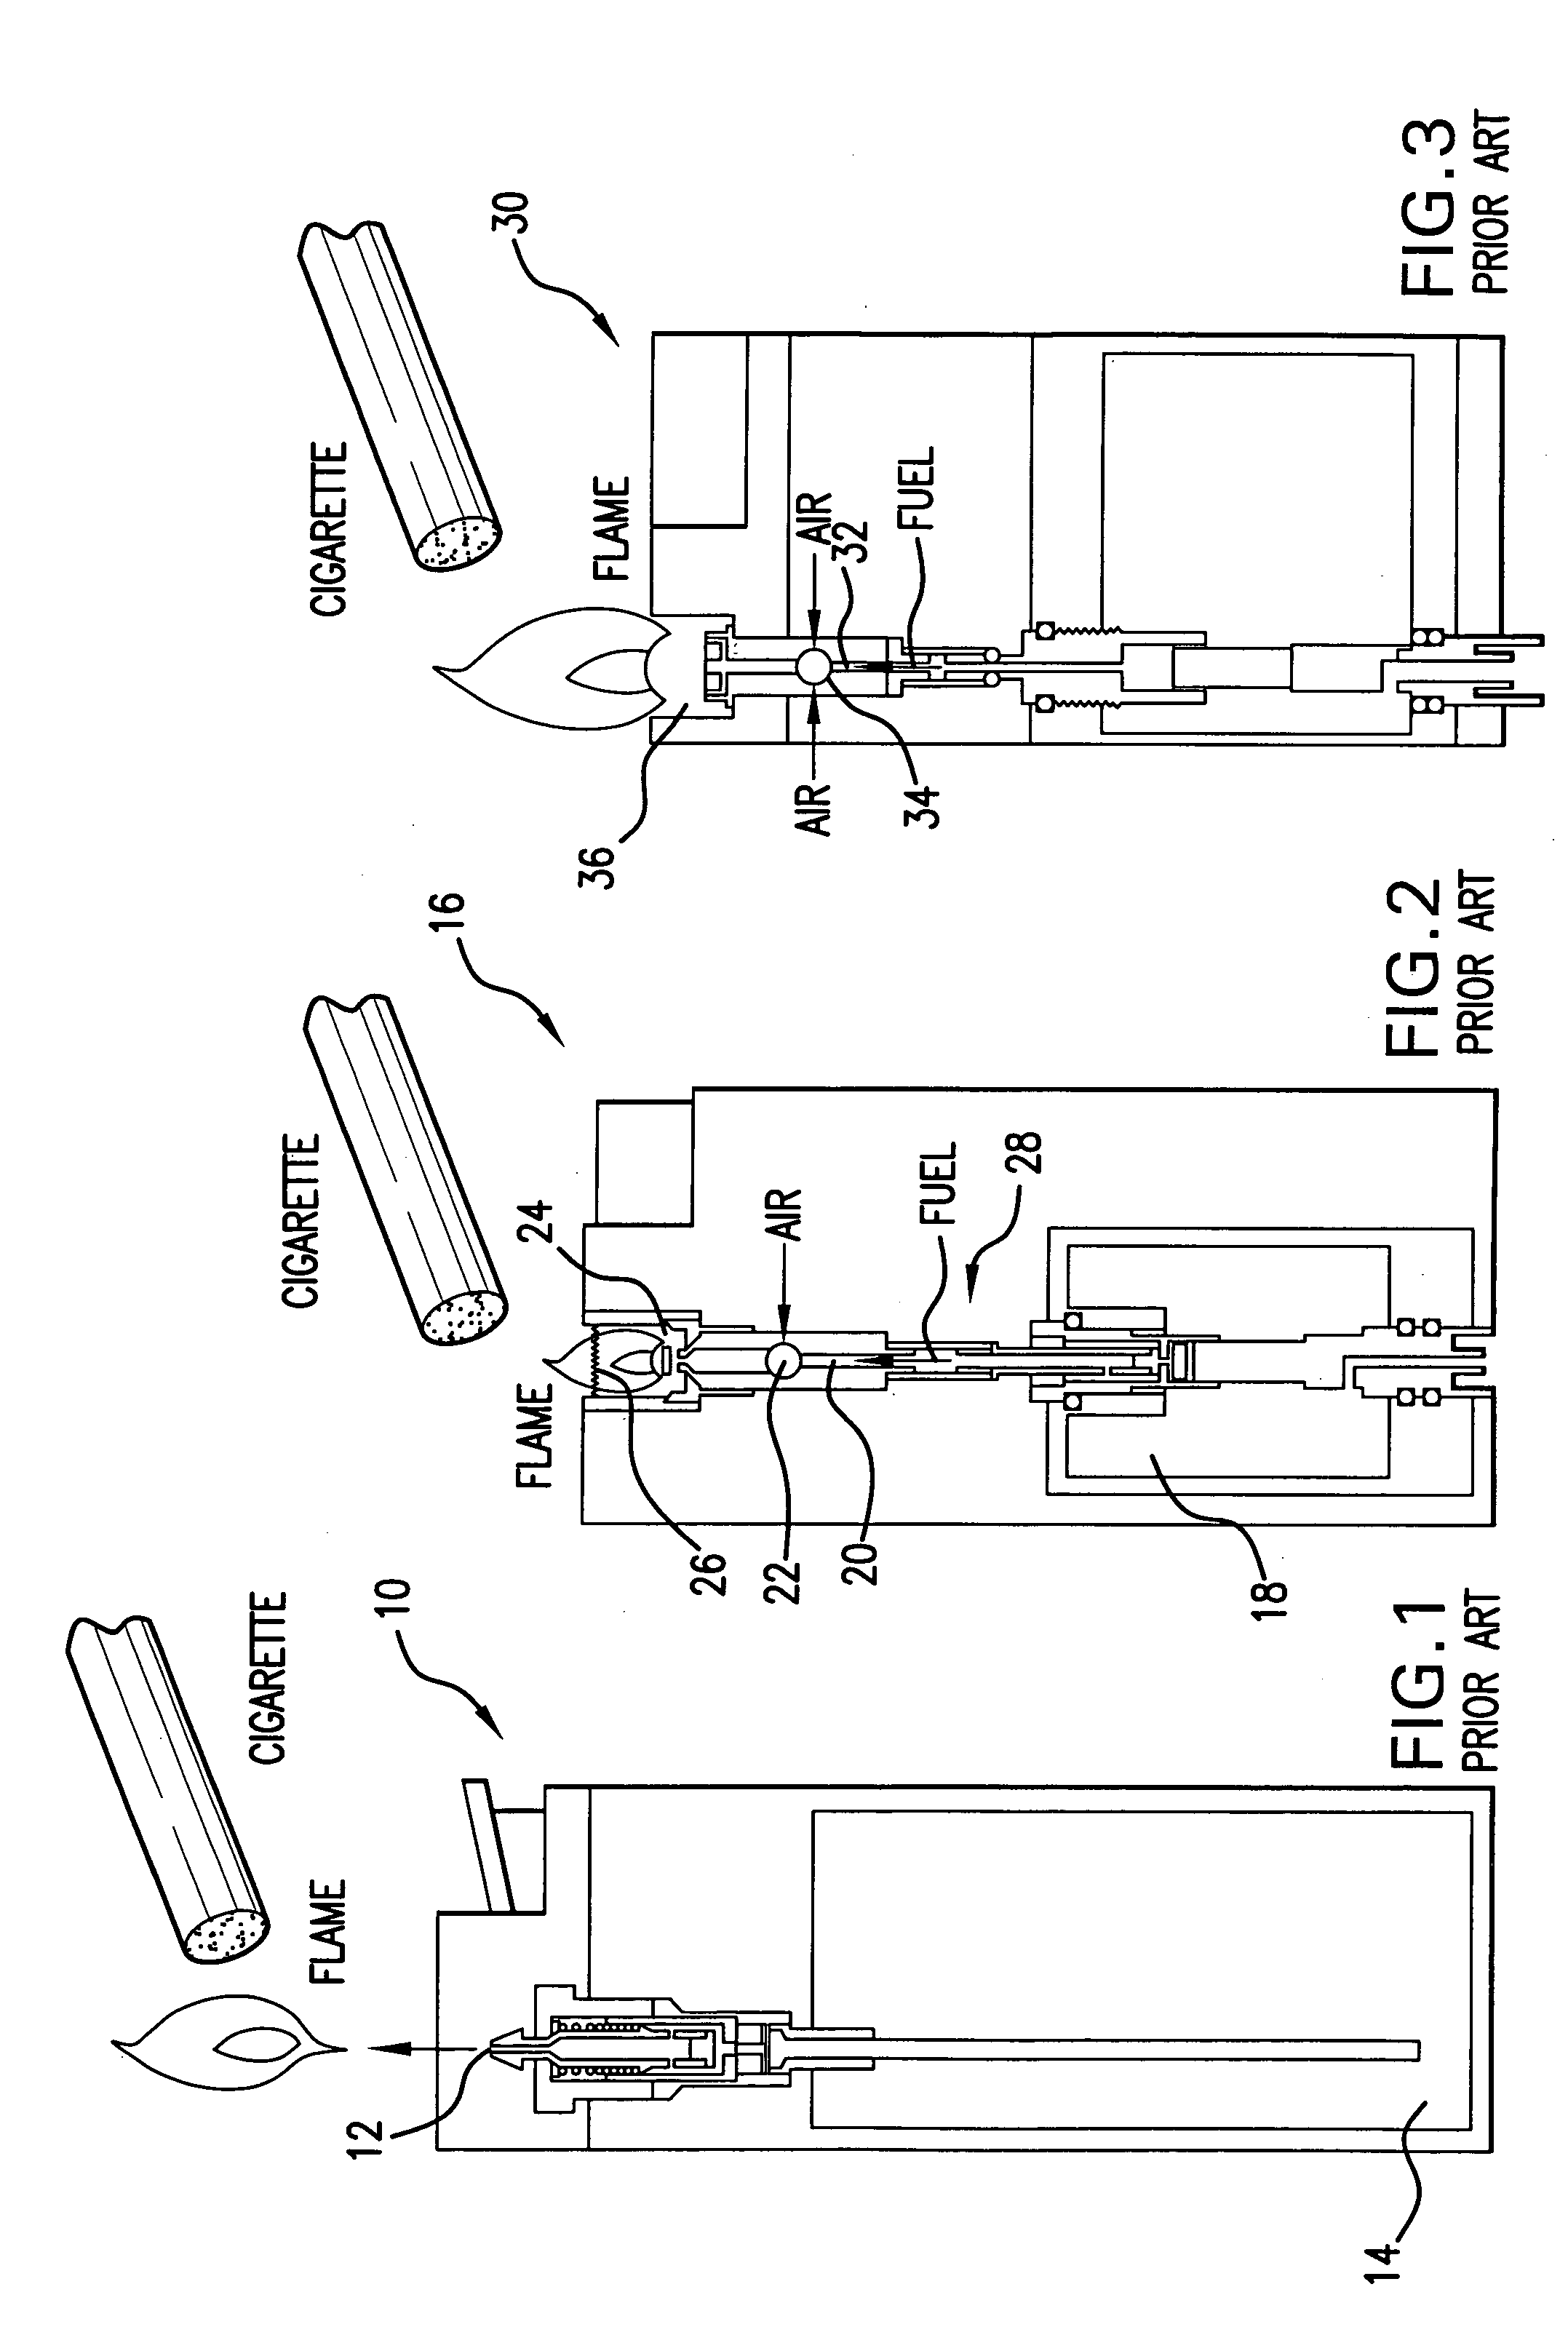 Cigarette lighter with improved safety properties